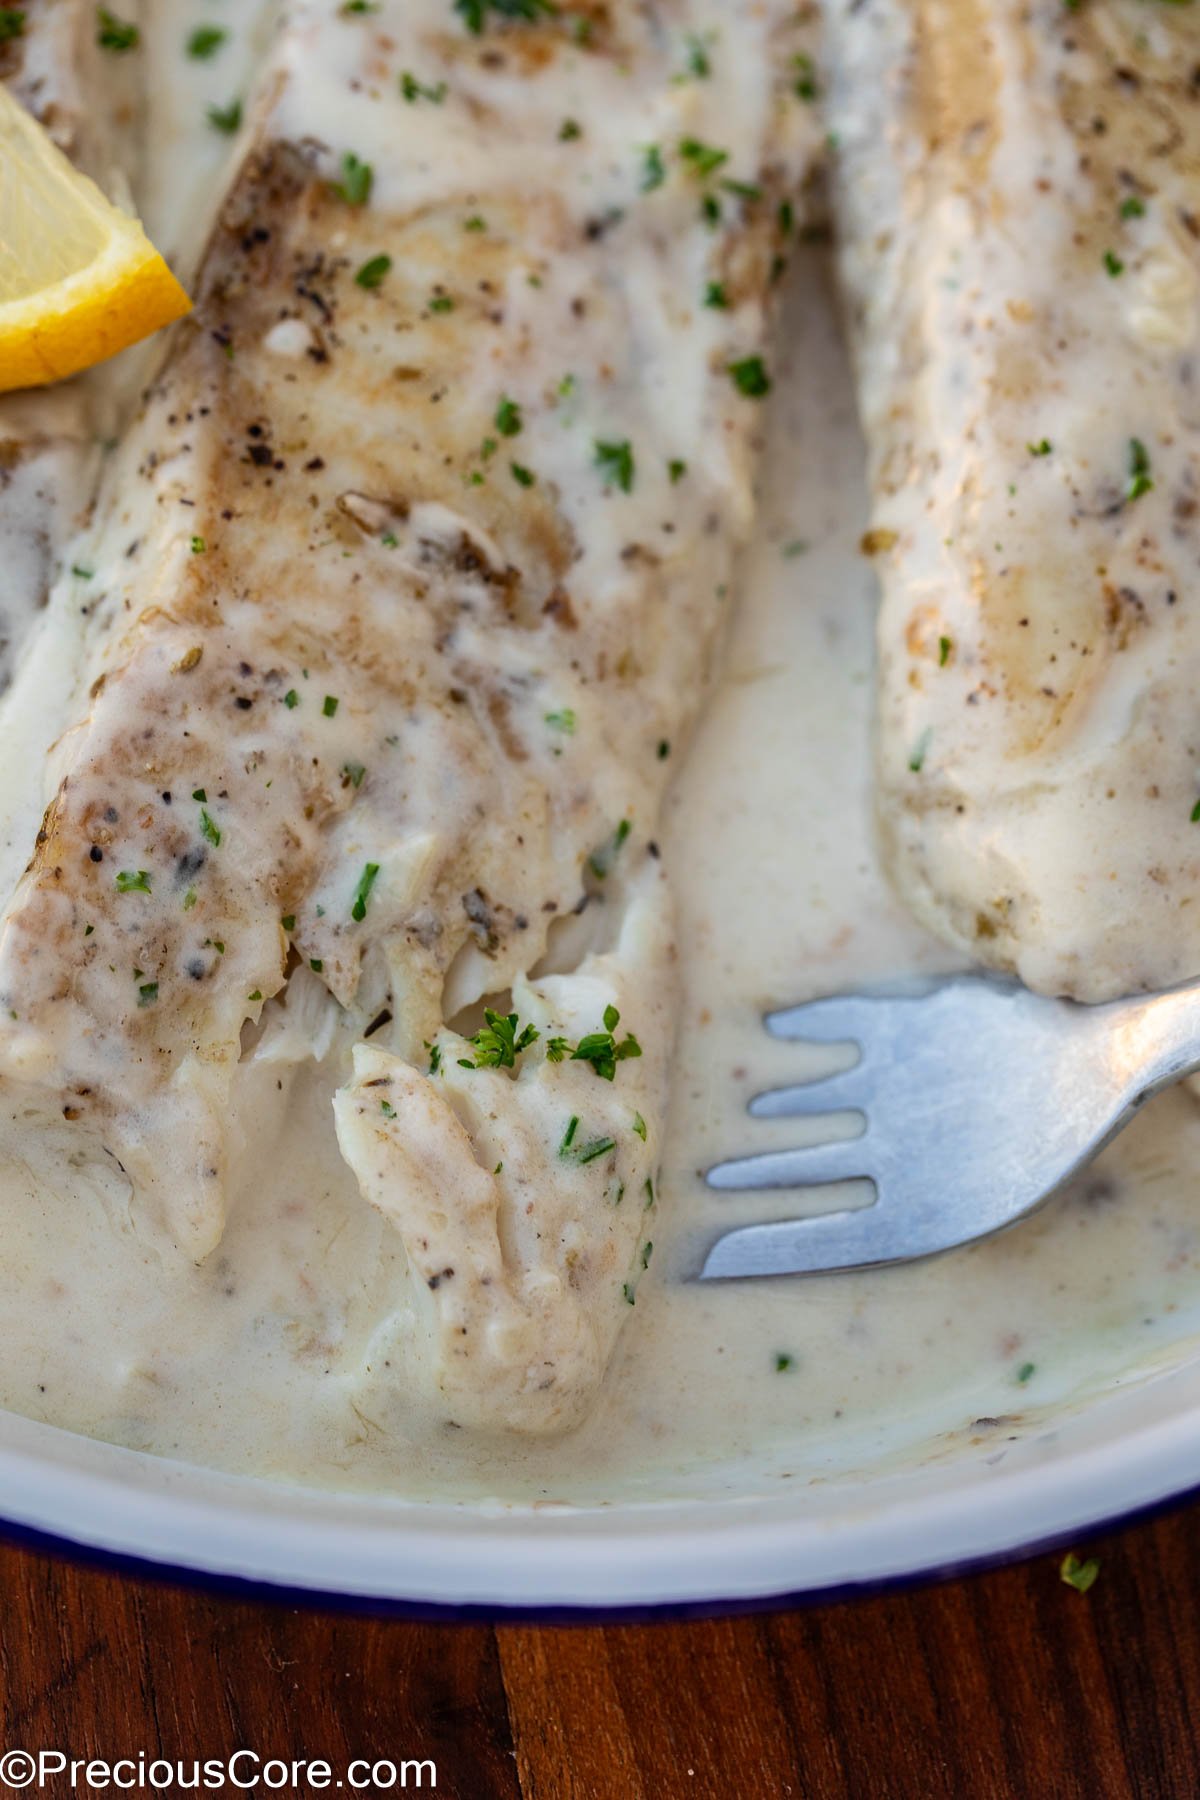 Dipping fork into fish in white sauce.